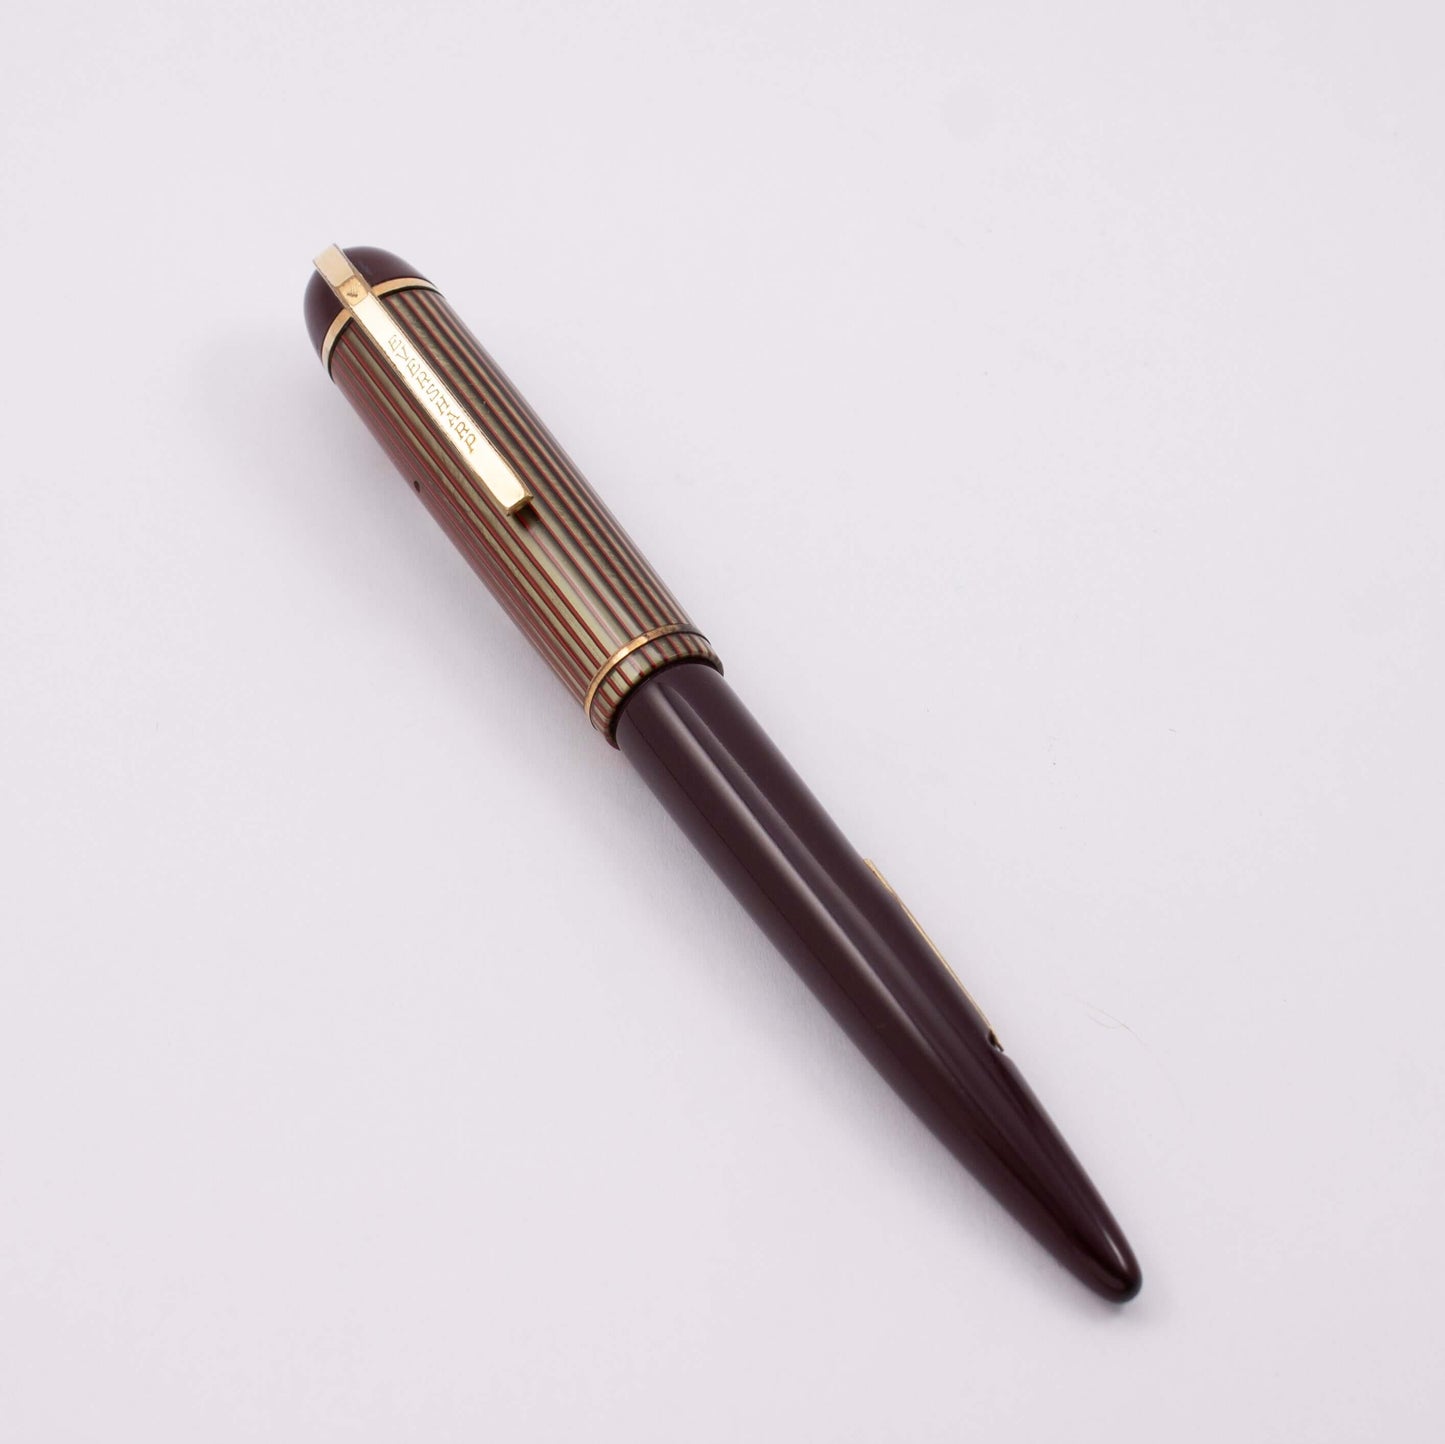 Eversharp Skyline Fountain Pen,Burgundy Barrel, Red-Green Striated Cap, Gold Filled Trim, Extra Fine 14k Nib Type: Restored Lever Filling Fountain Pen Product Name: Eversharp Skyline Manufacture Year: 1940's Length: ﻿5 1/4 Filling System: Lever Filler, re